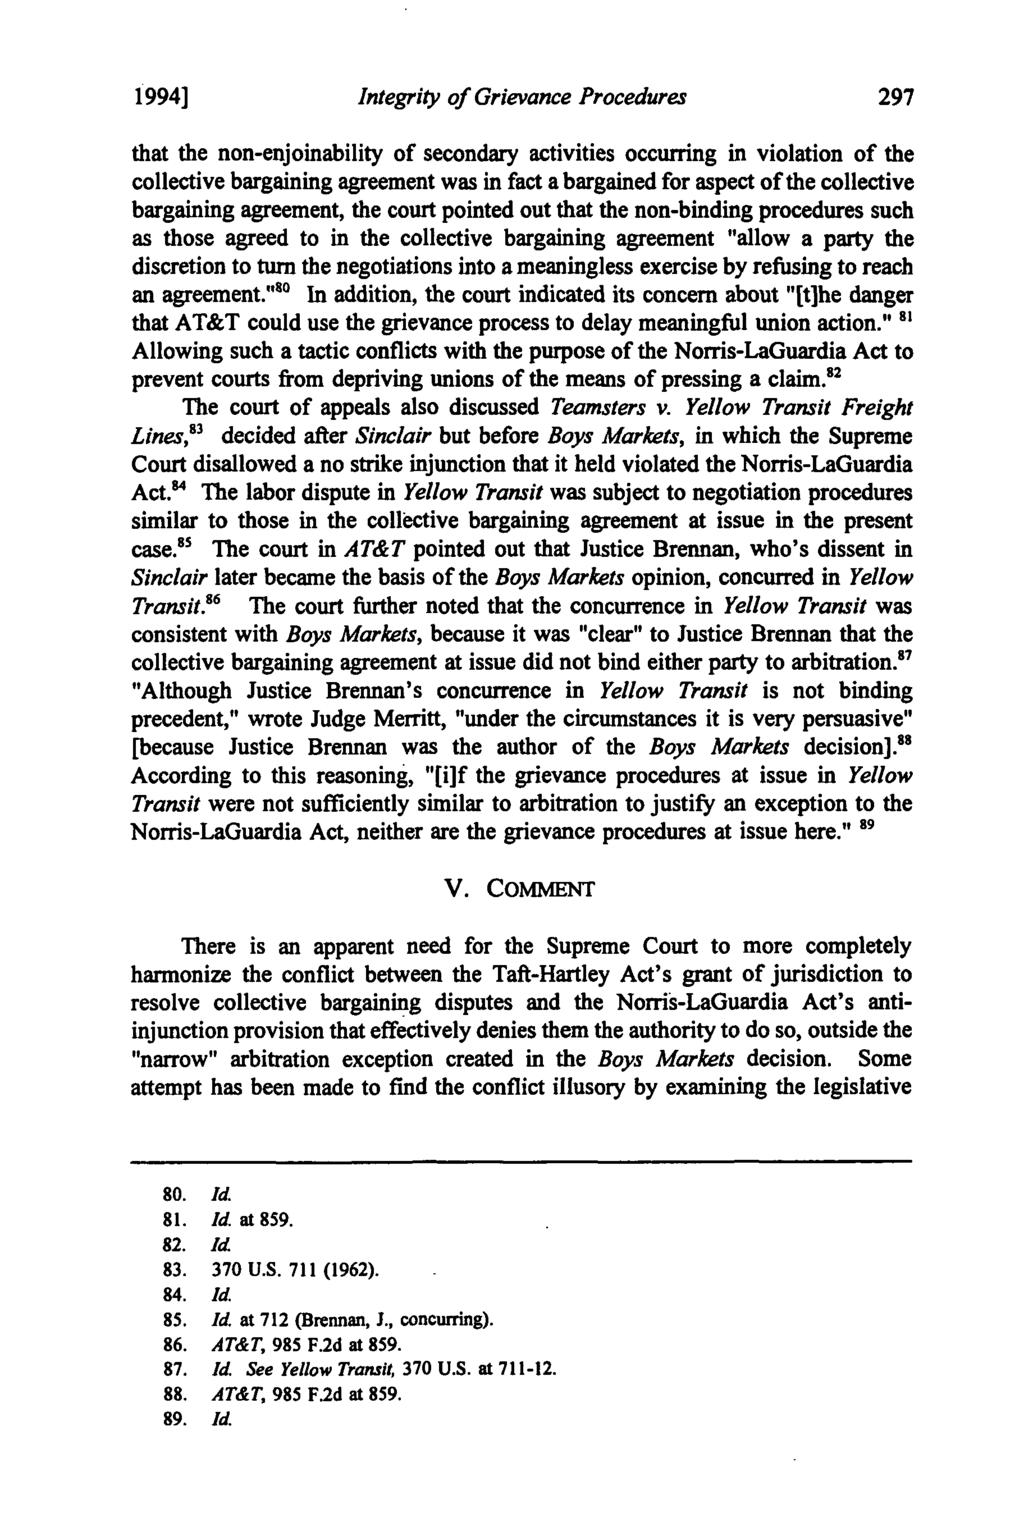 1994] Kroeker: Kroeker: Union Walks in the Sixth: Integrity of Grievance Procedures that the non-enjoinability of secondary activities occurring in violation of the collective bargaining agreement